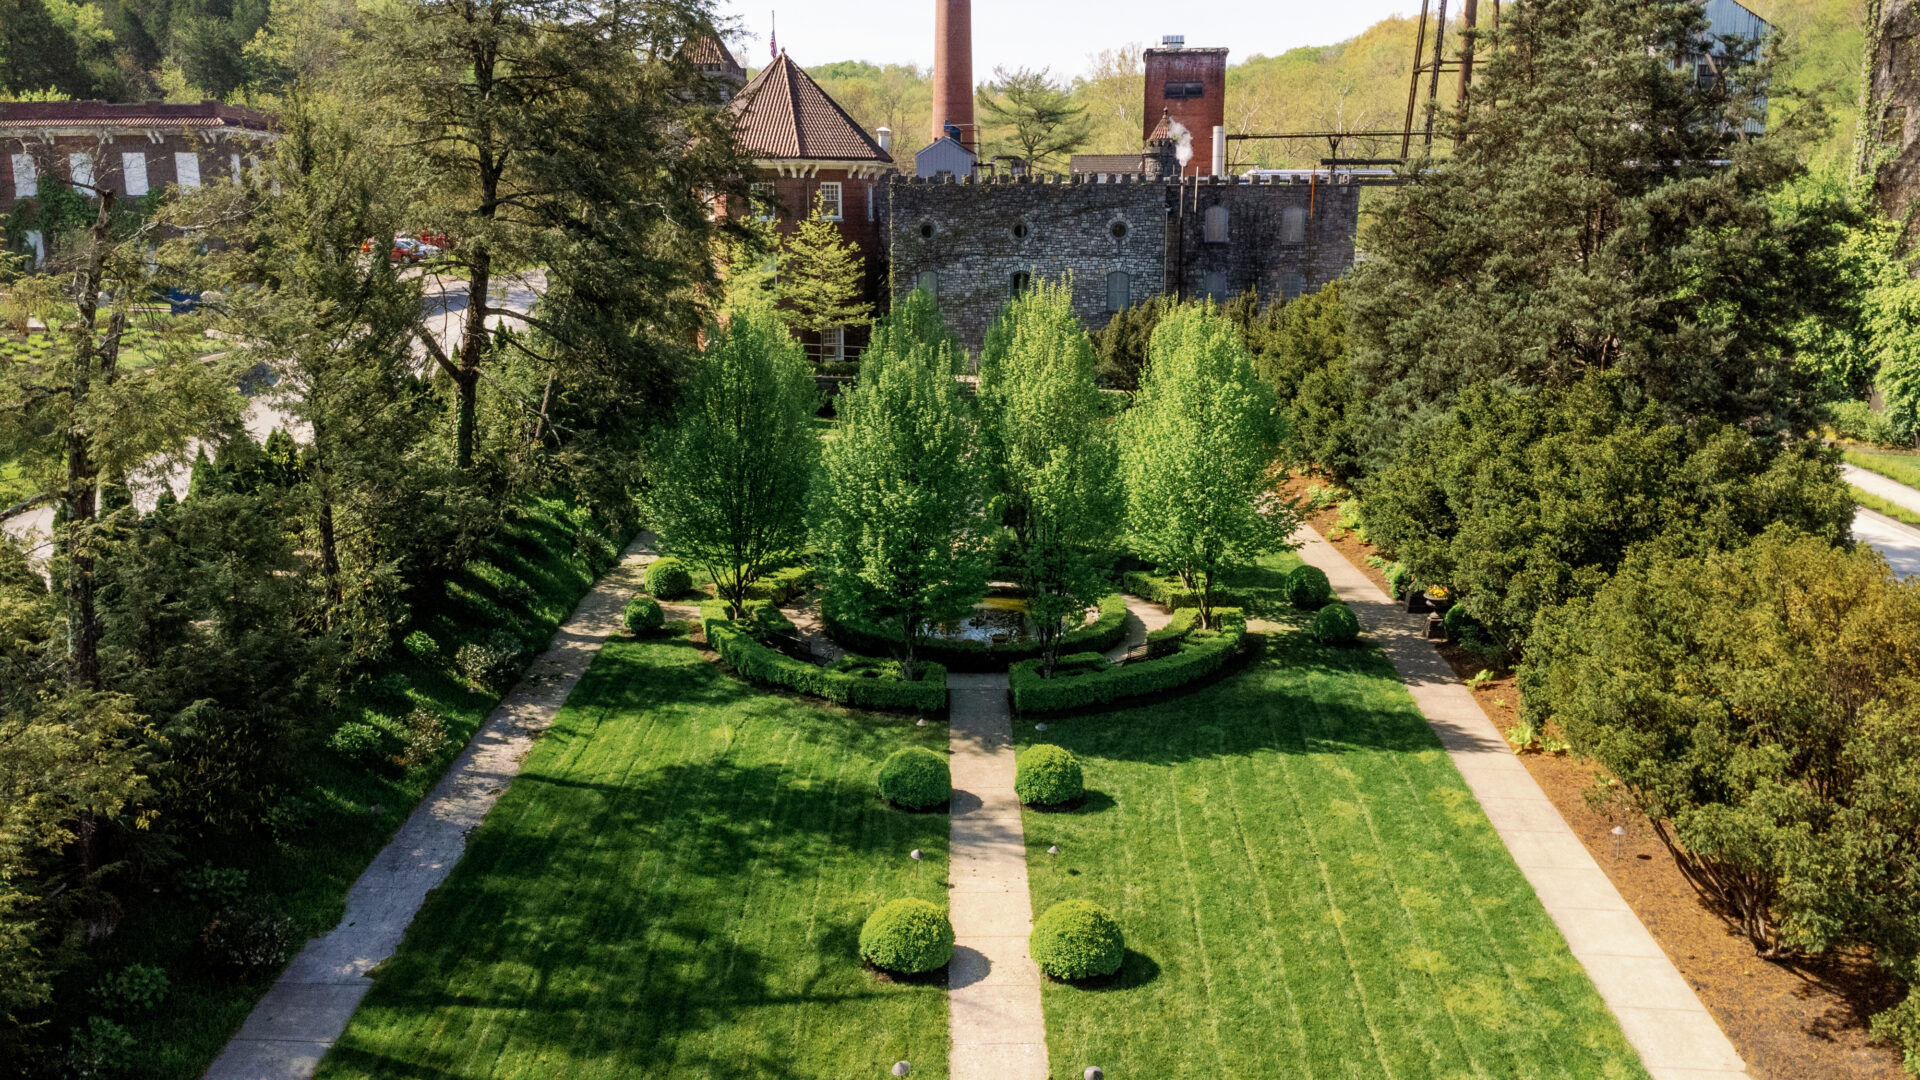 The gardens of Castle and Key distillery